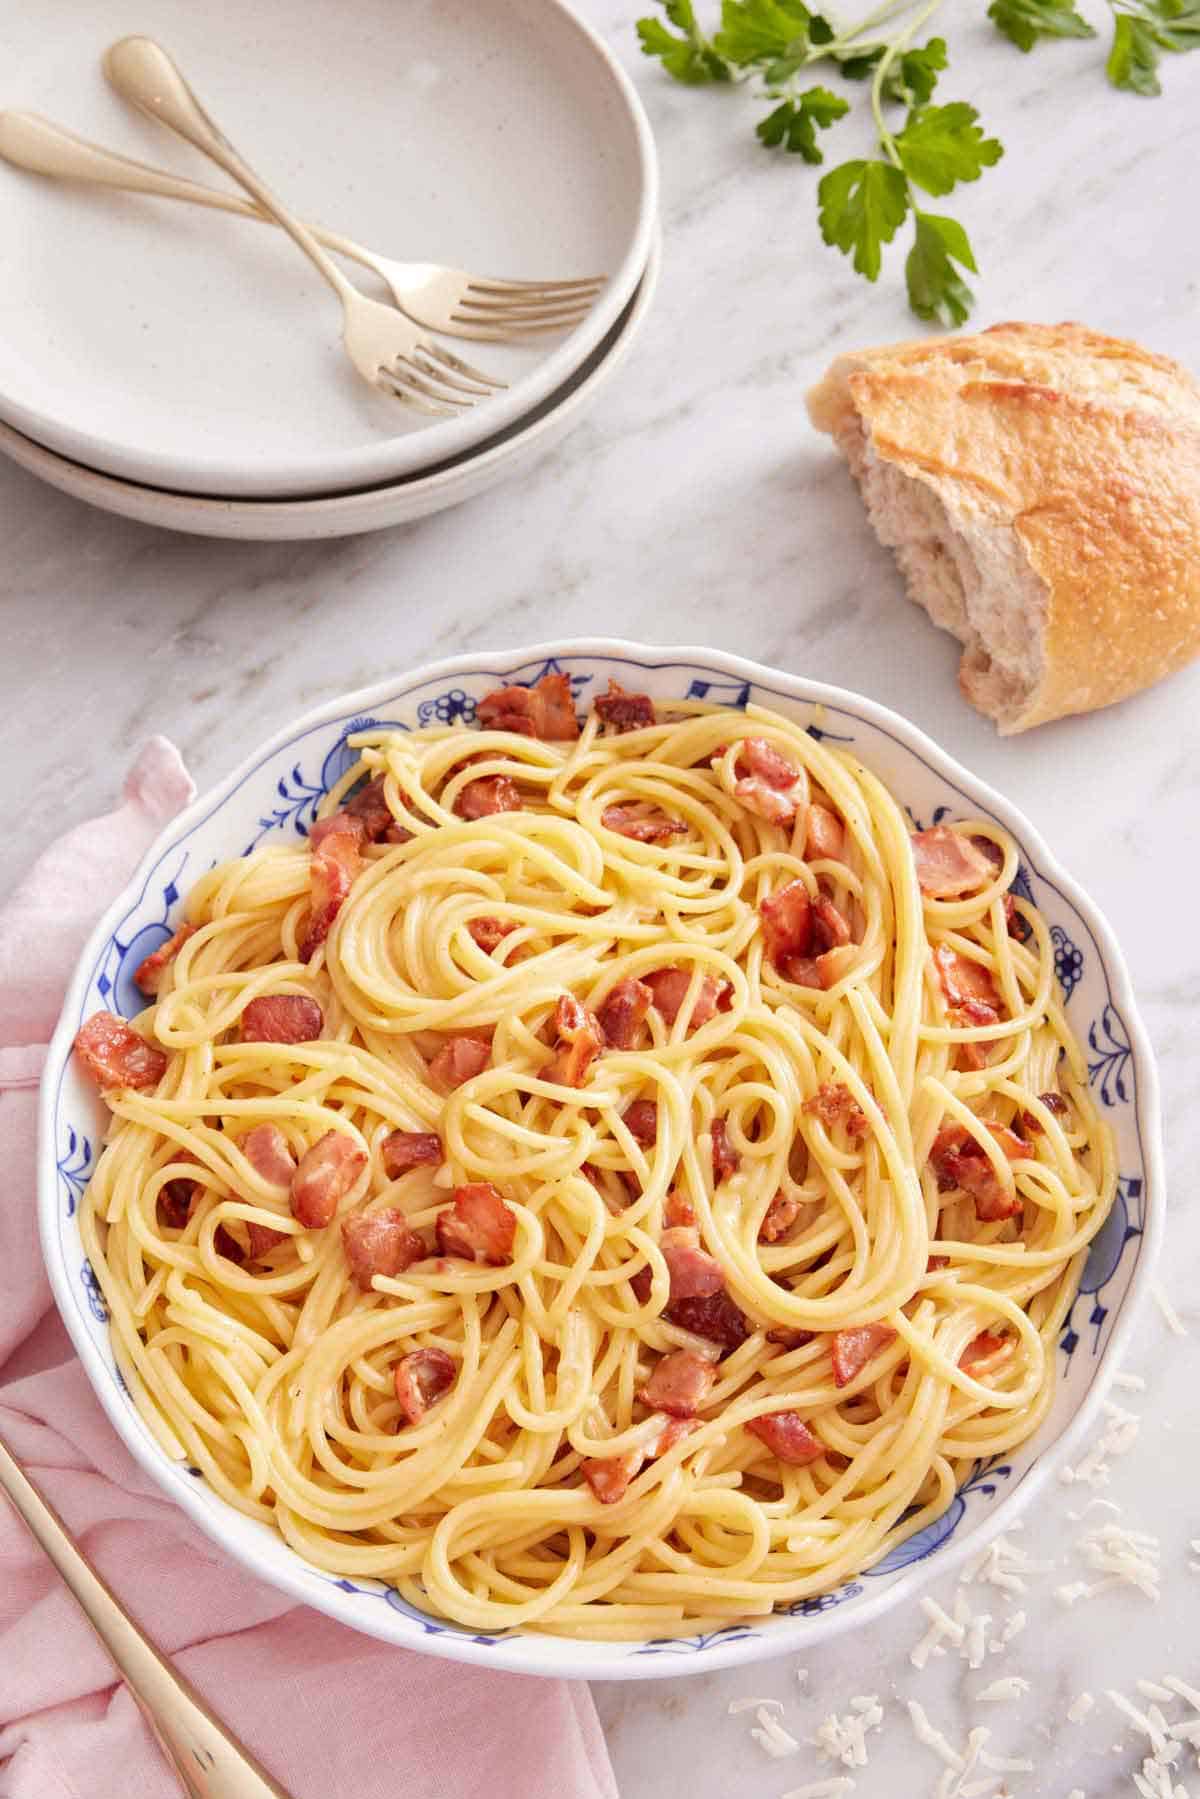 A bowl of pasta carbonara with torn bread and stacked plates with forks in the background.